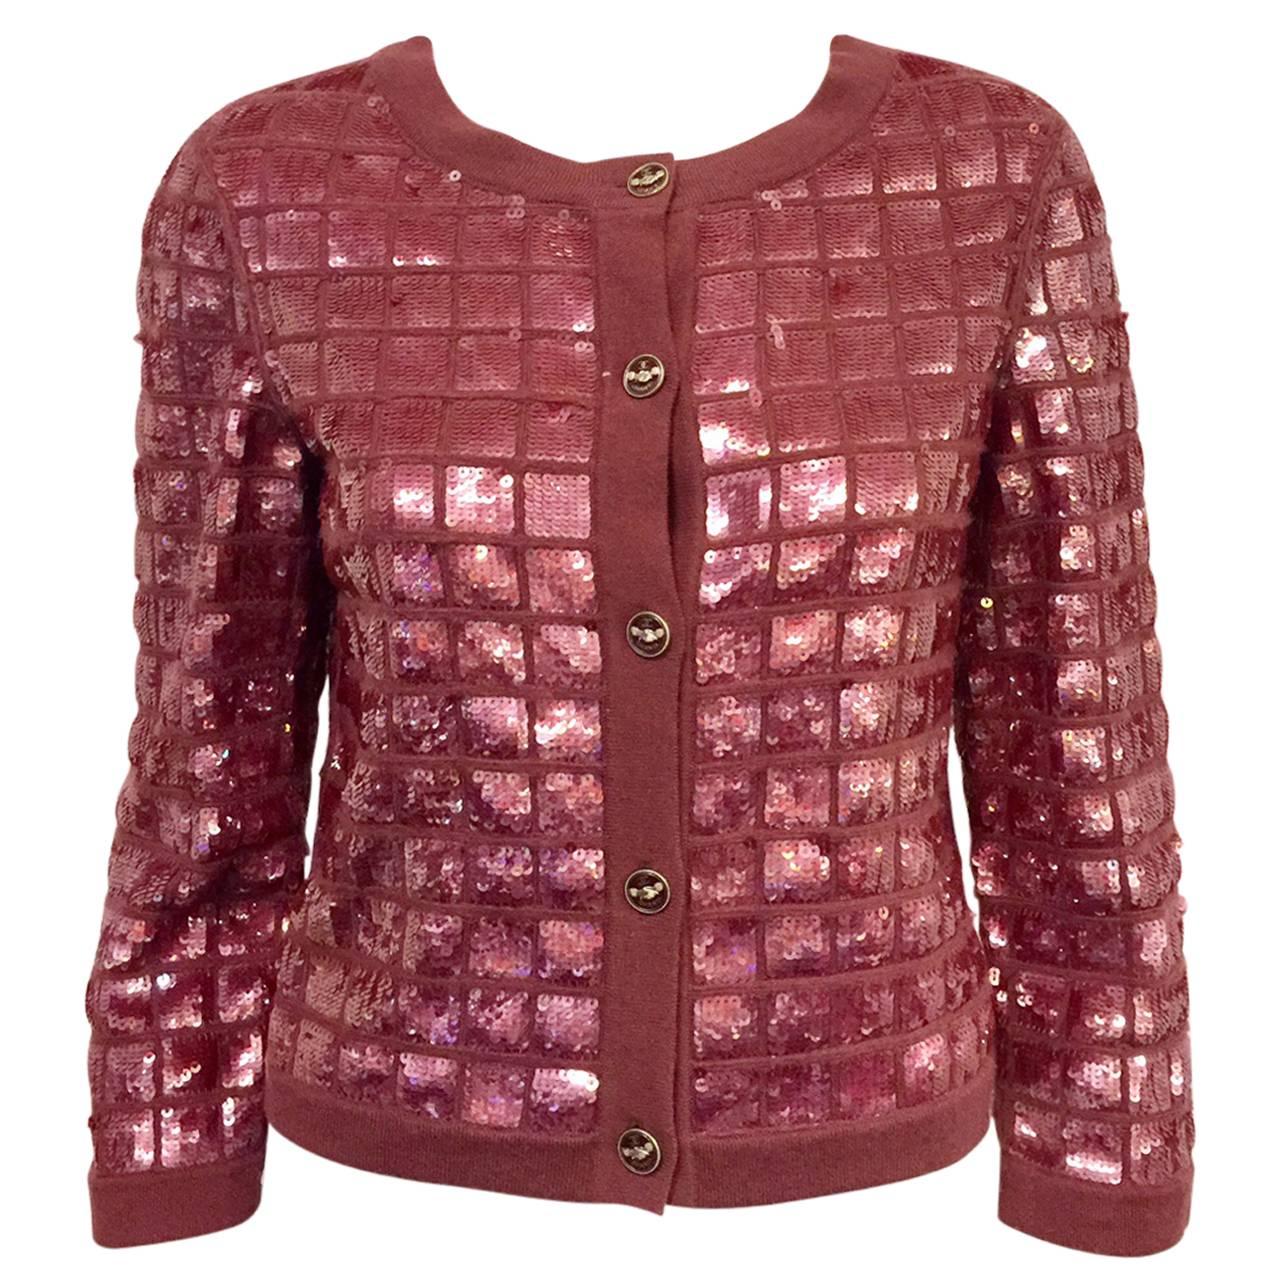 2008 Chanel Med. Burgundy Cashmere Cardigan Iridescent Sequin Embroidery 